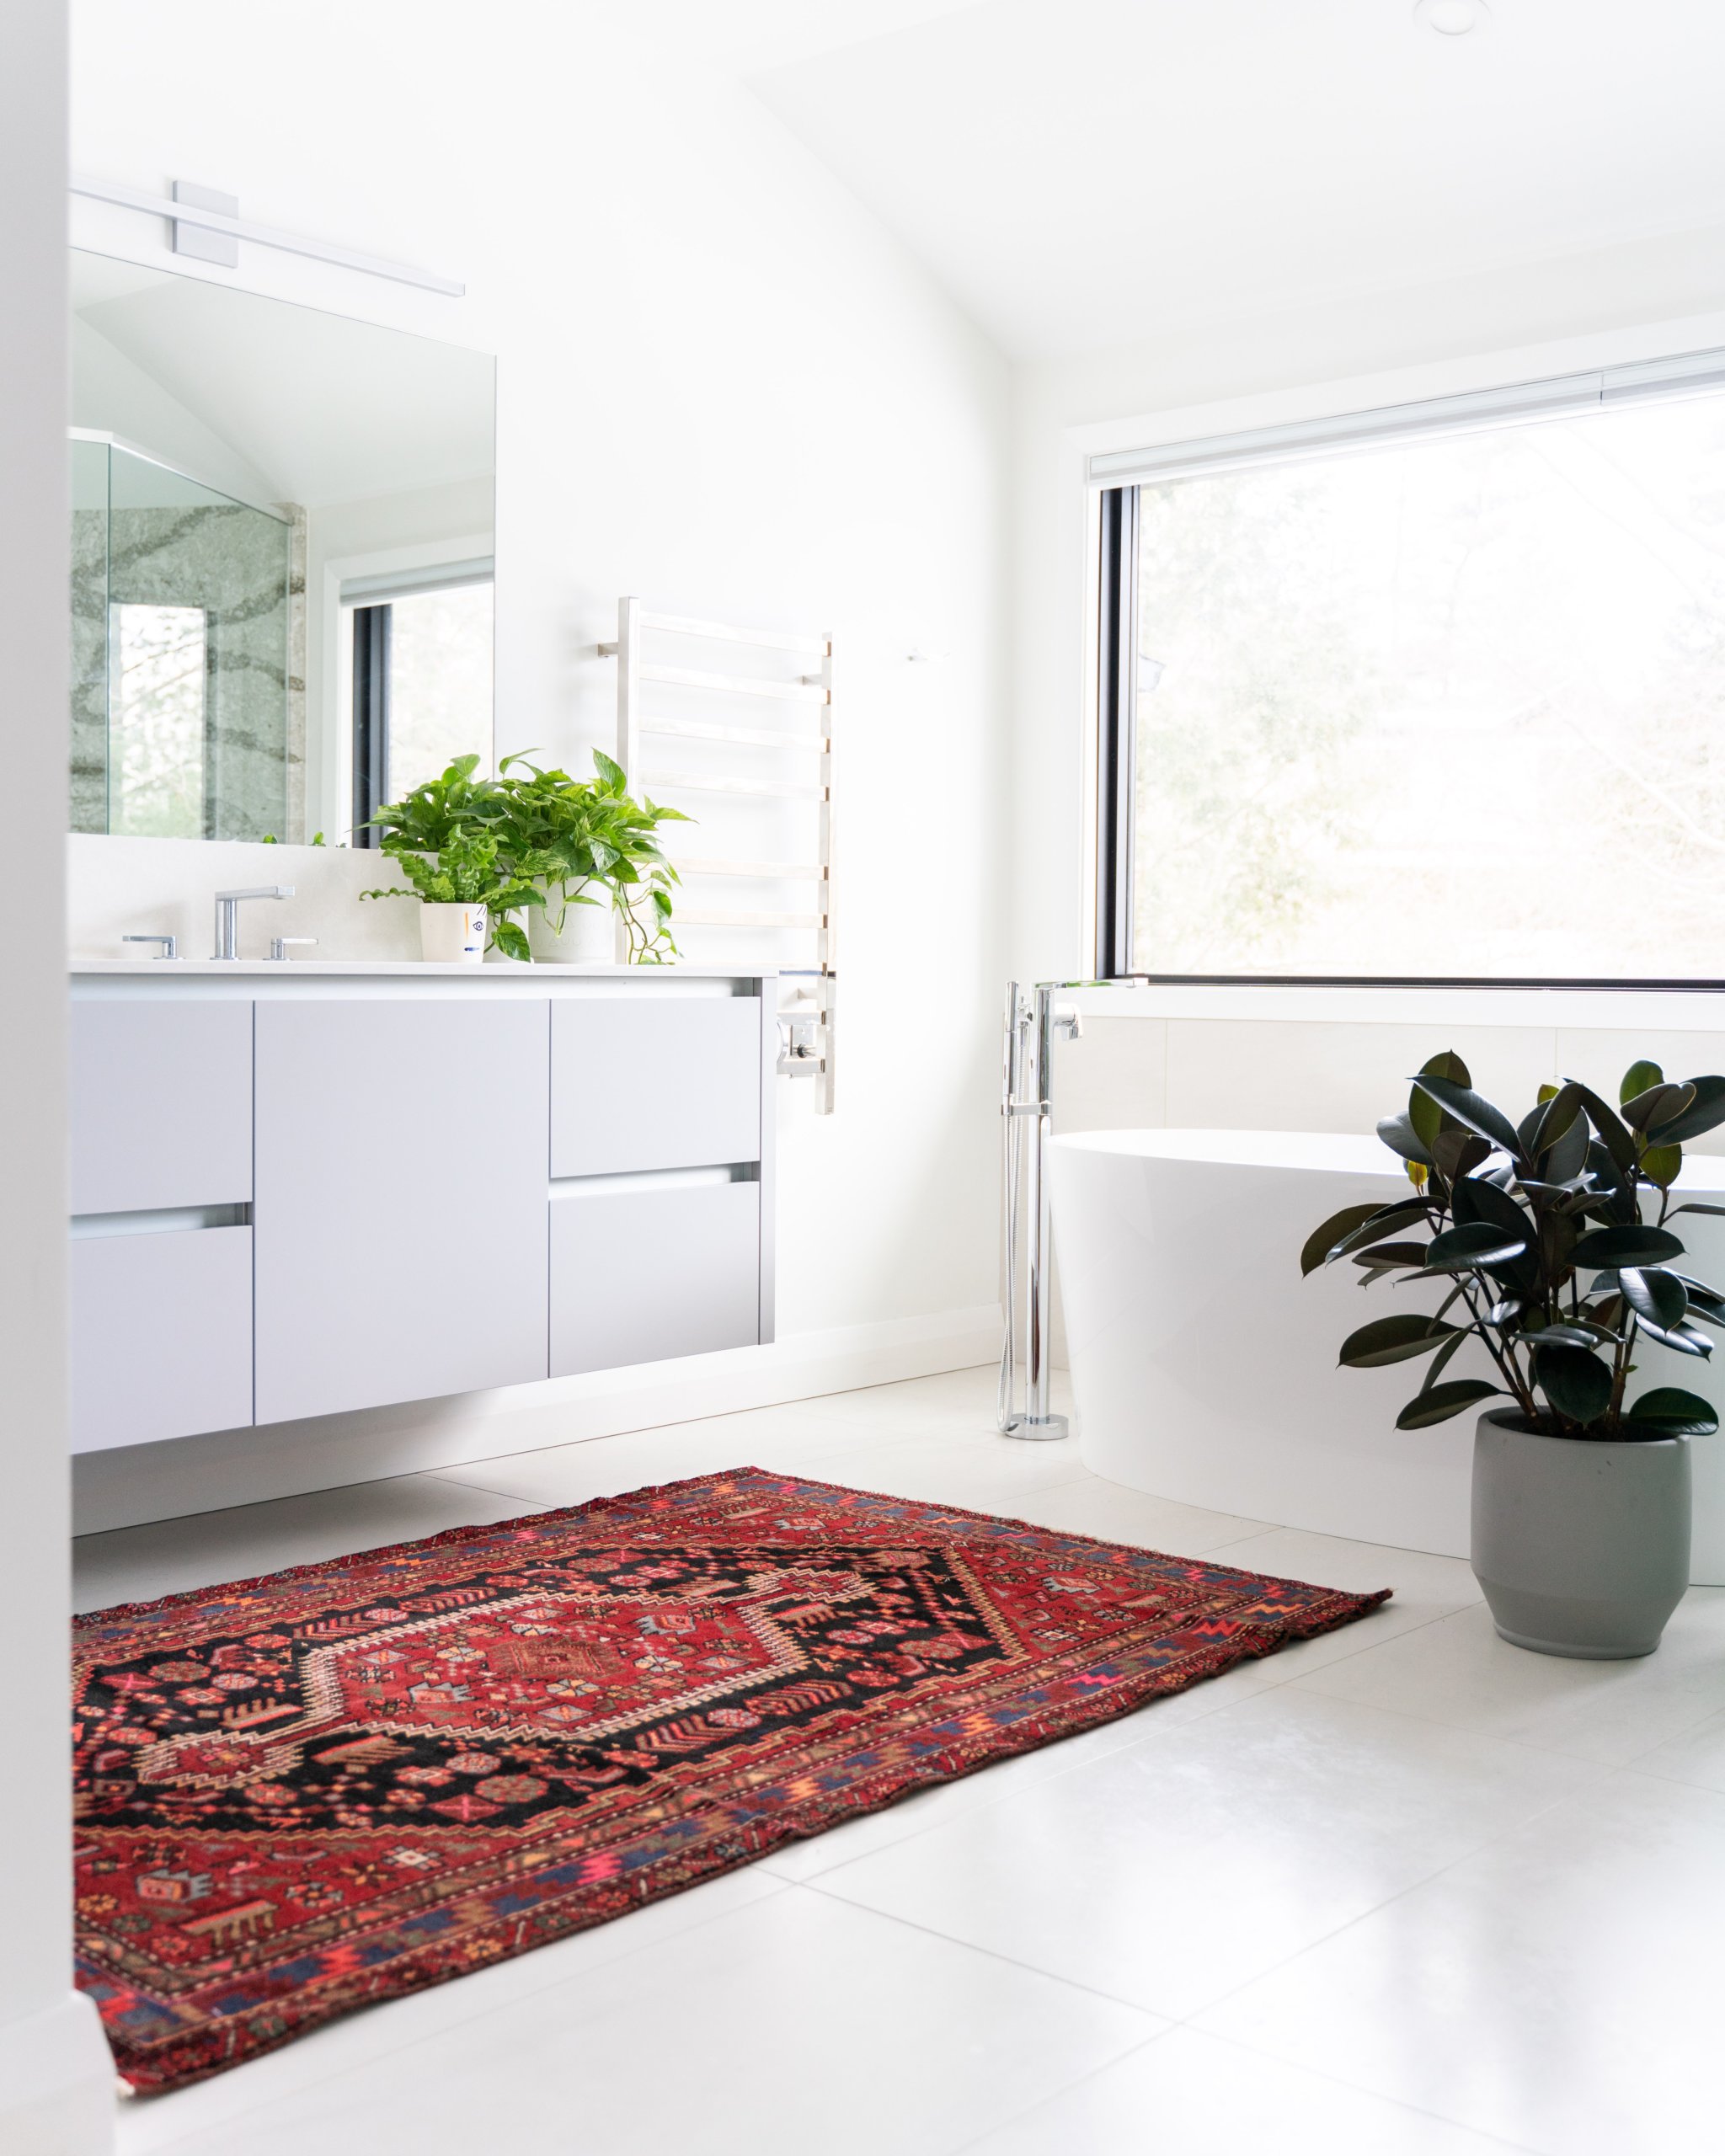 Red patterned rug in an all white bathroom with potted plants